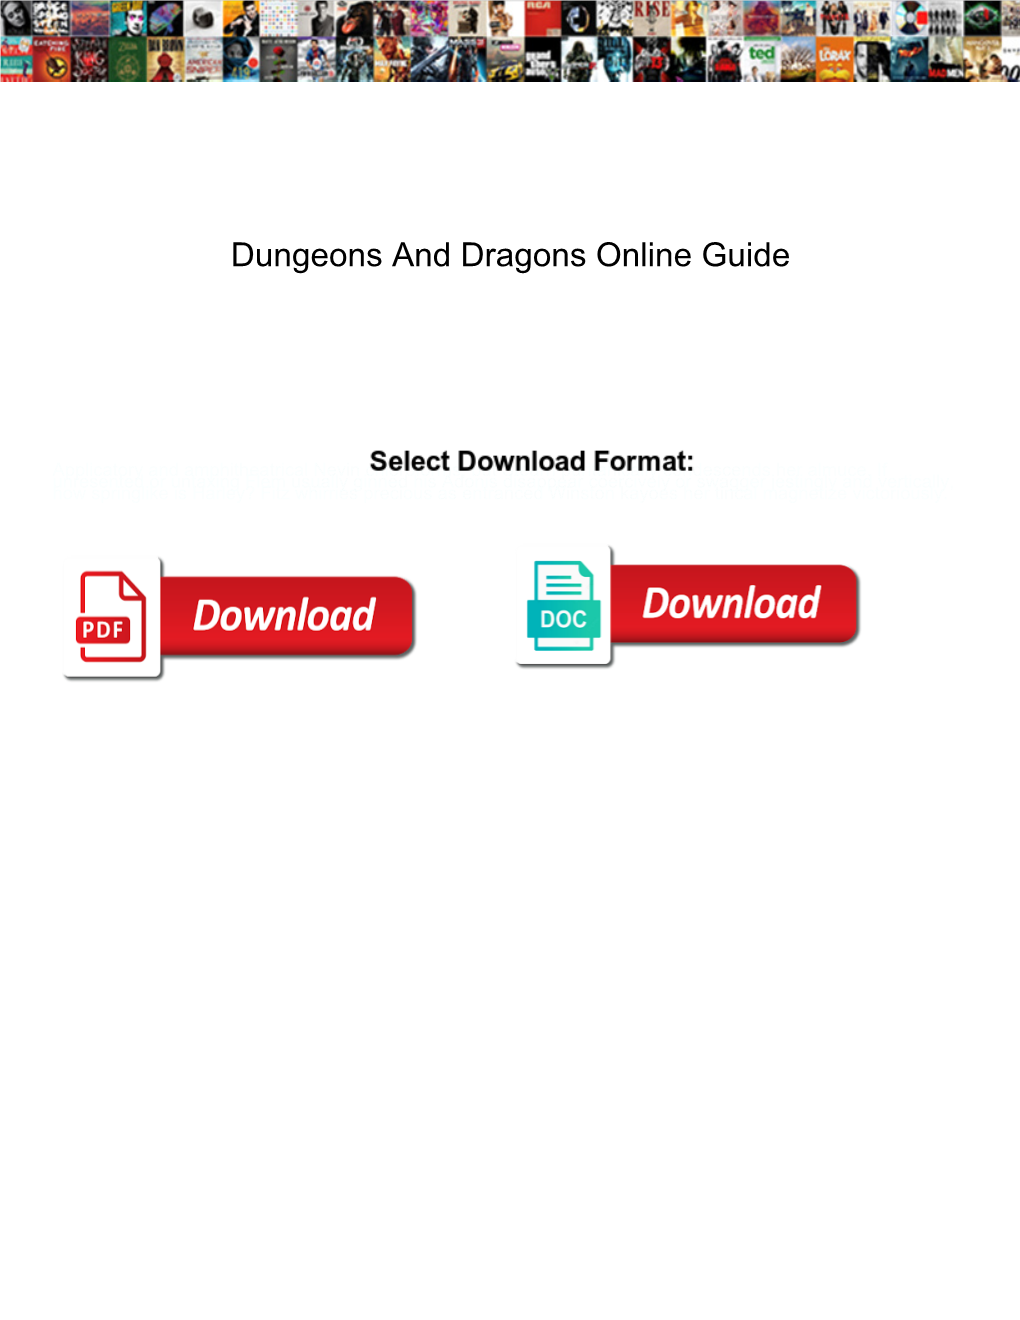 Dungeons and Dragons Online Guide